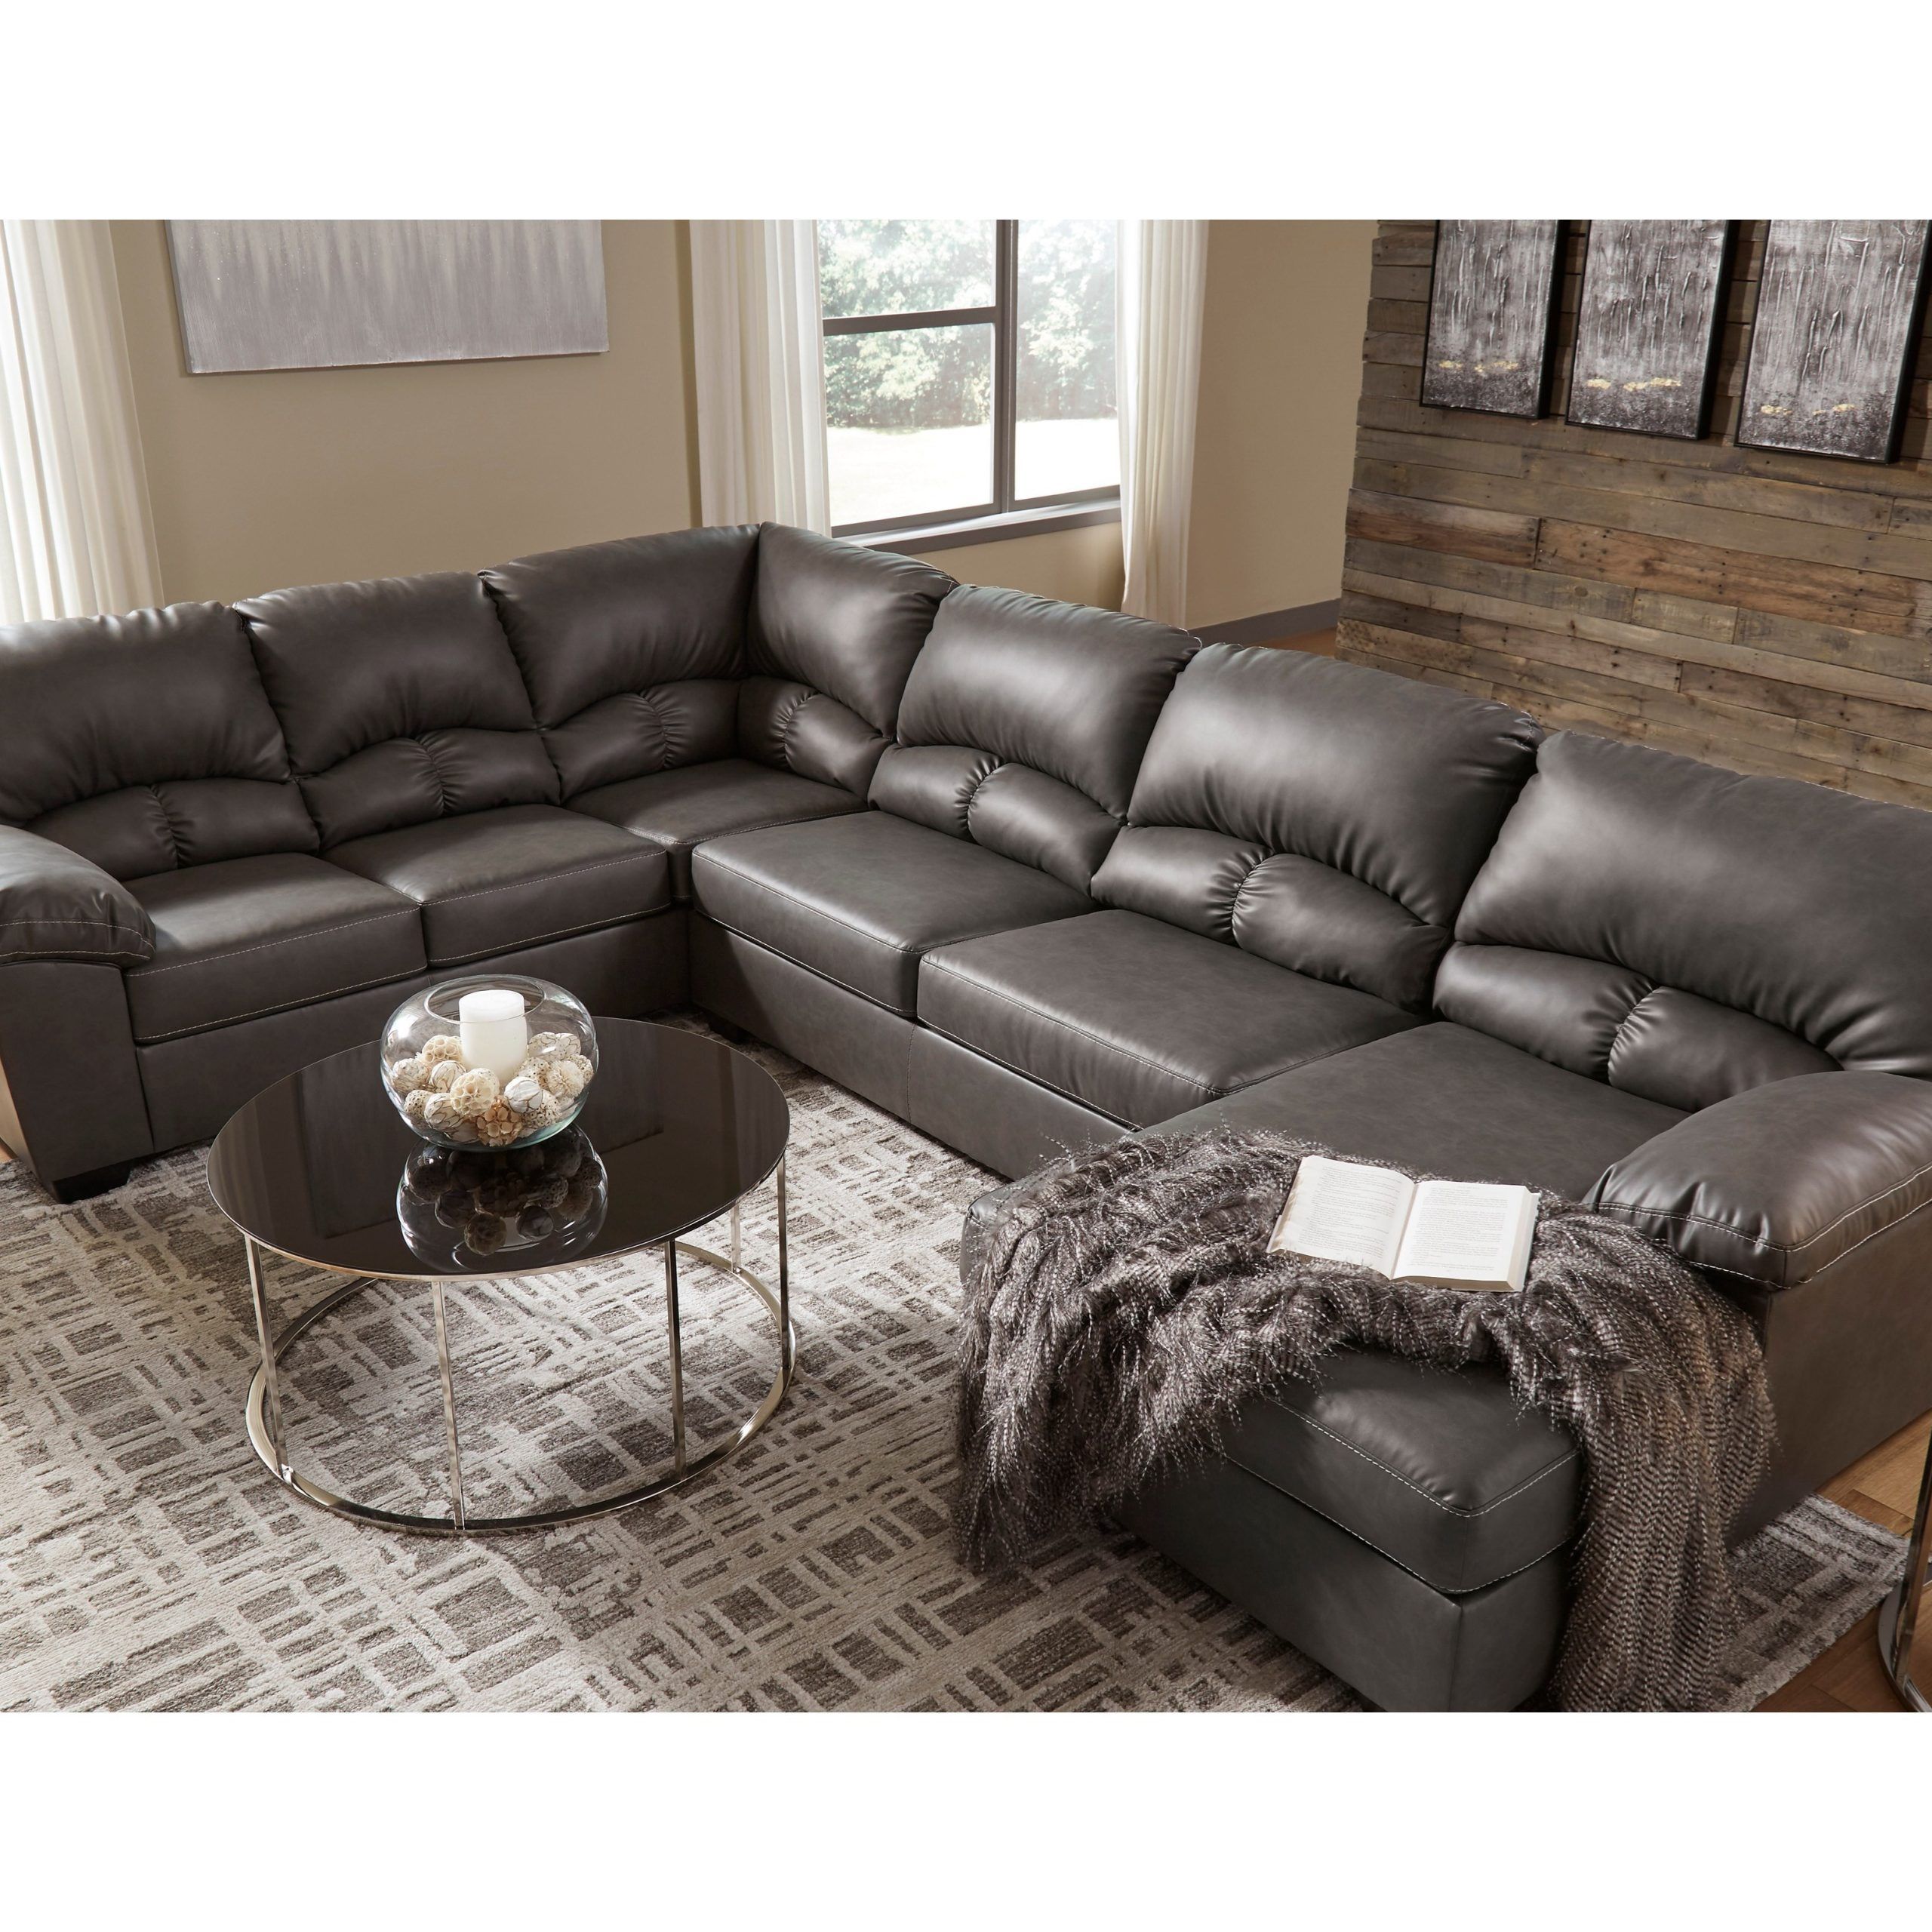 Benchcraft Aberton Faux Leather 3 Piece Sectional With Chaise | Wayside Pertaining To 3 Piece Leather Sectional Sofa Sets (Gallery 2 of 20)